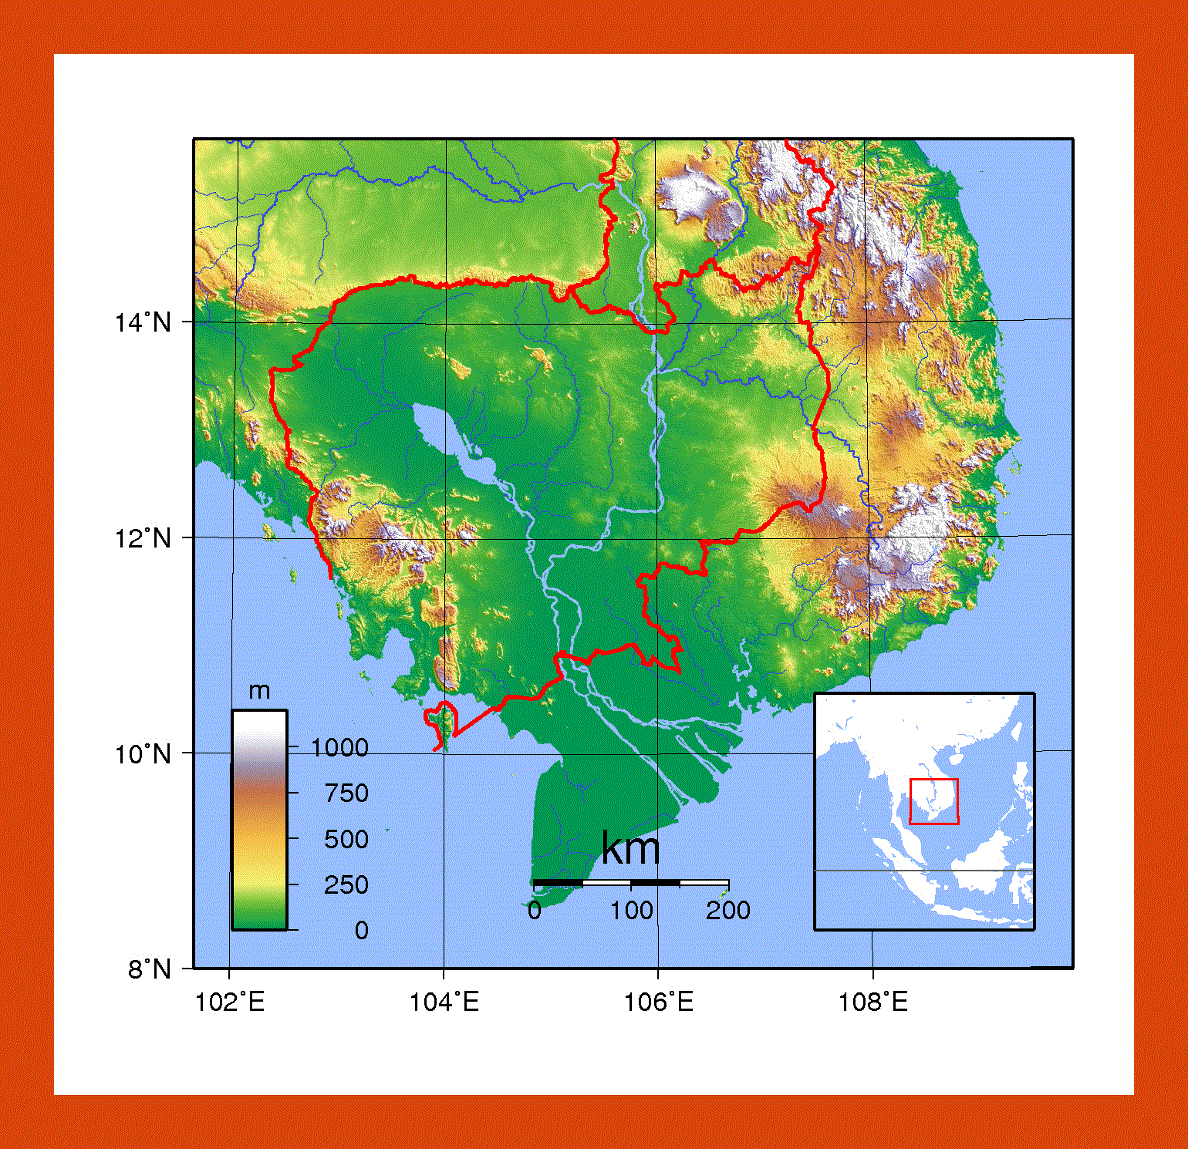 Topographical map of Cambodia